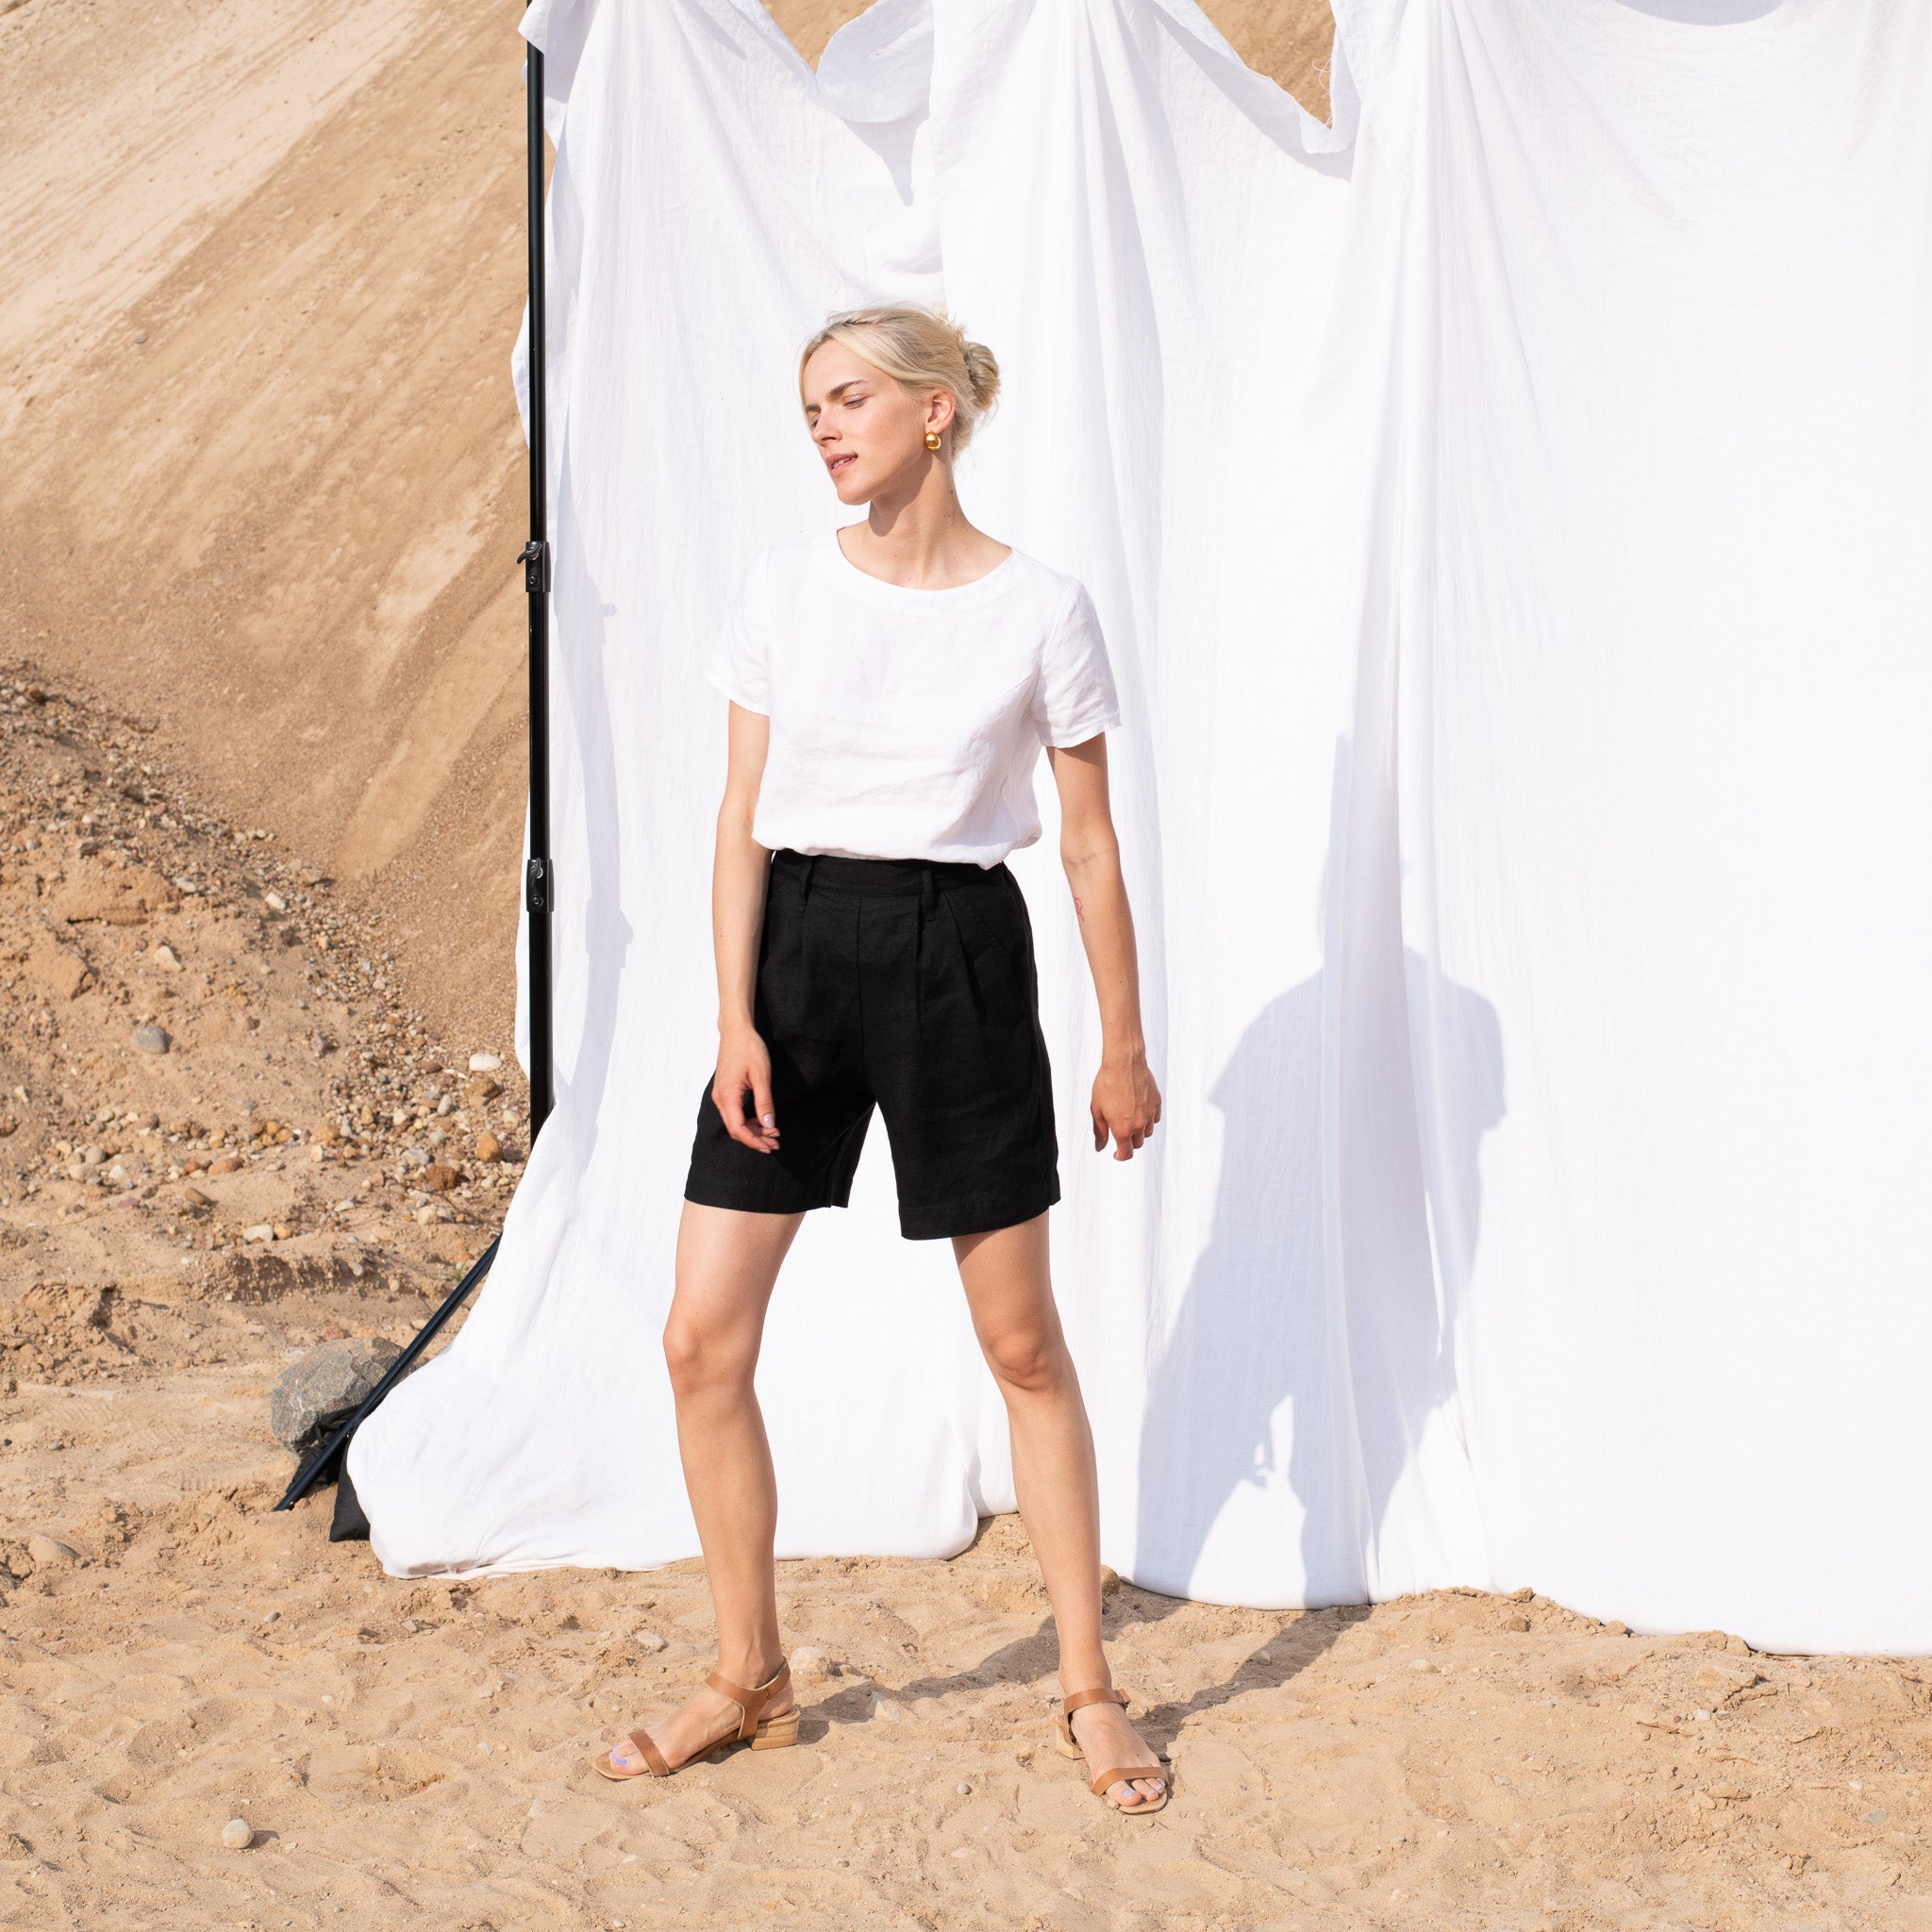 ANTIBES pleated linen shorts in Black